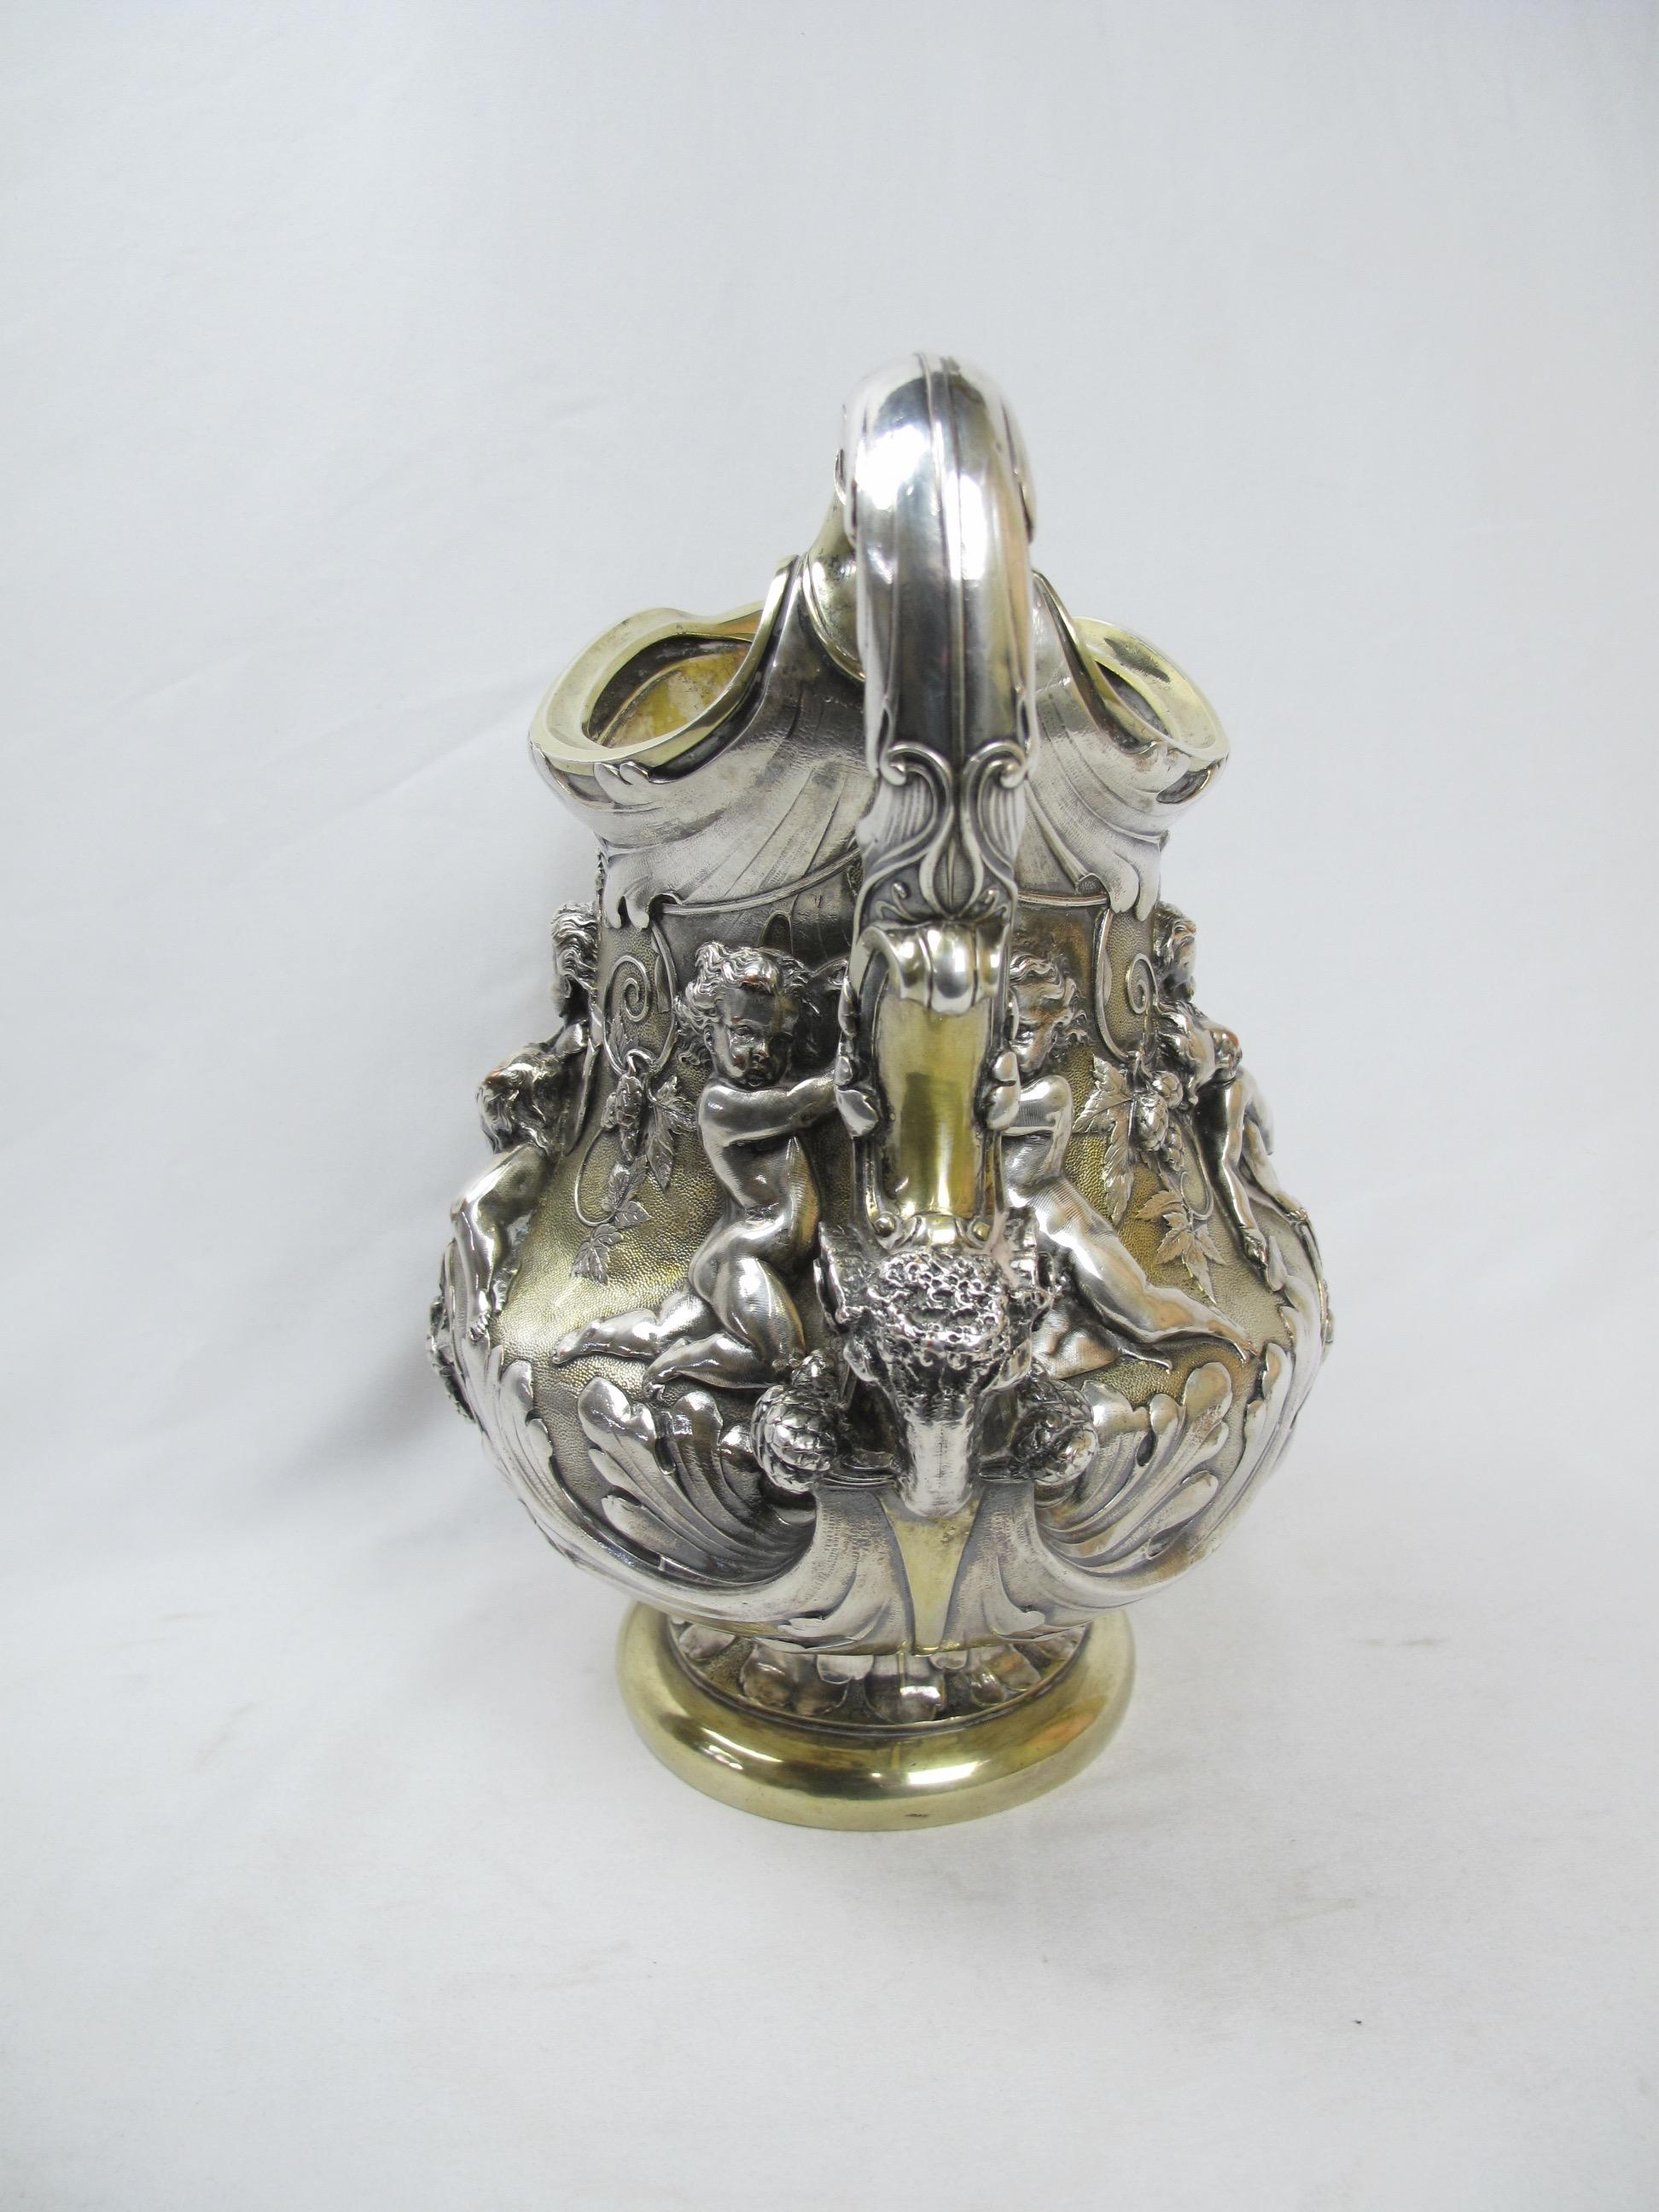 English Large Ornate Putti Cavorting Among Hops Repousse Pitcher Elkington 19th Century For Sale